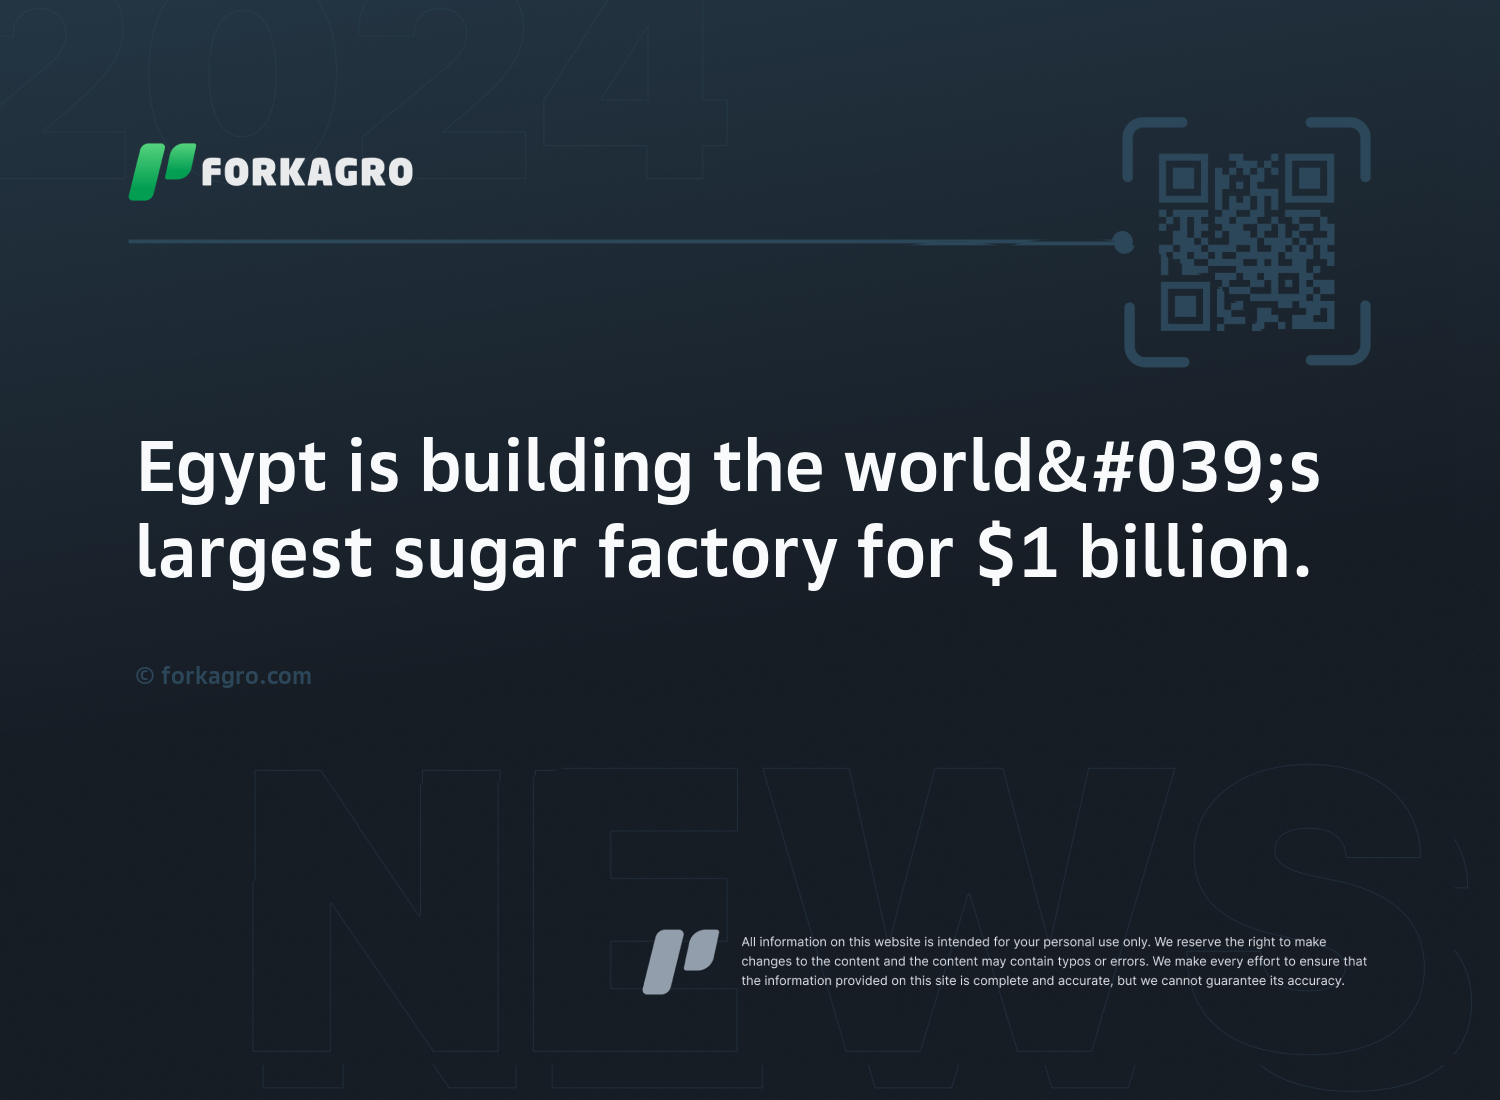 Egypt is building the world's largest sugar factory for $1 billion.